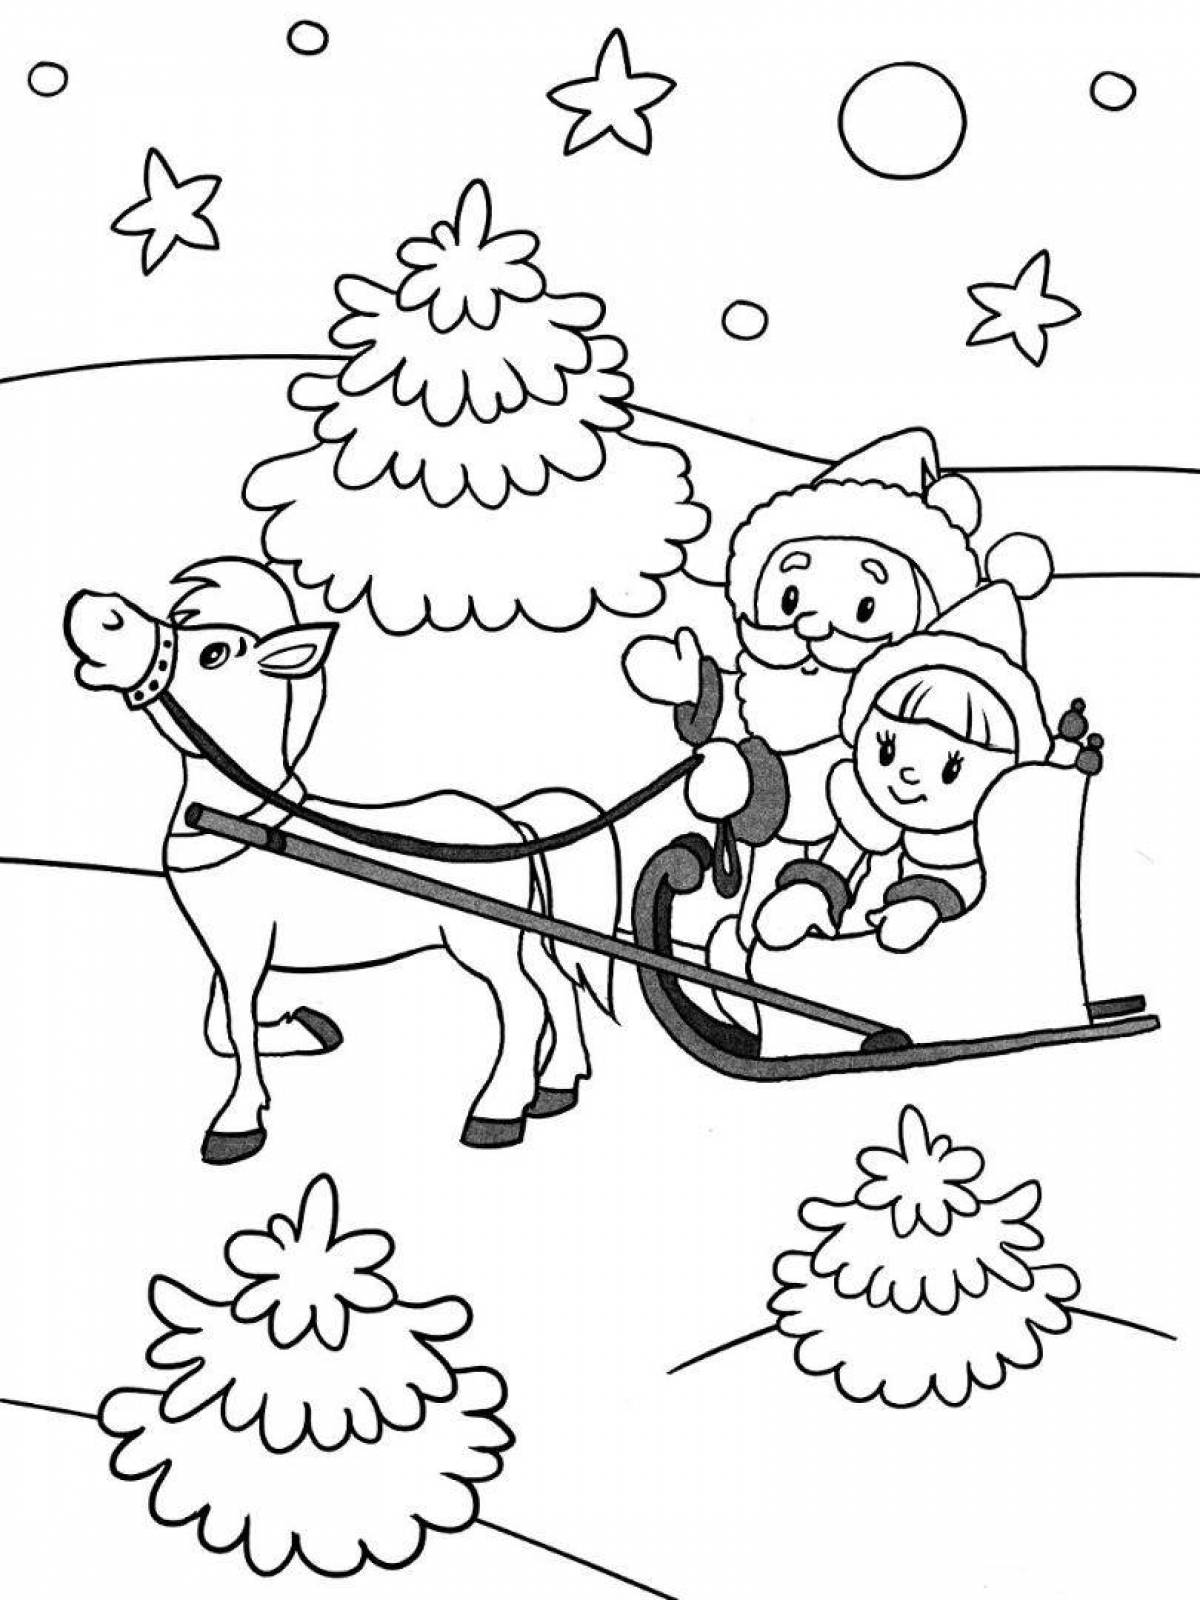 Merry Christmas coloring book for preschoolers